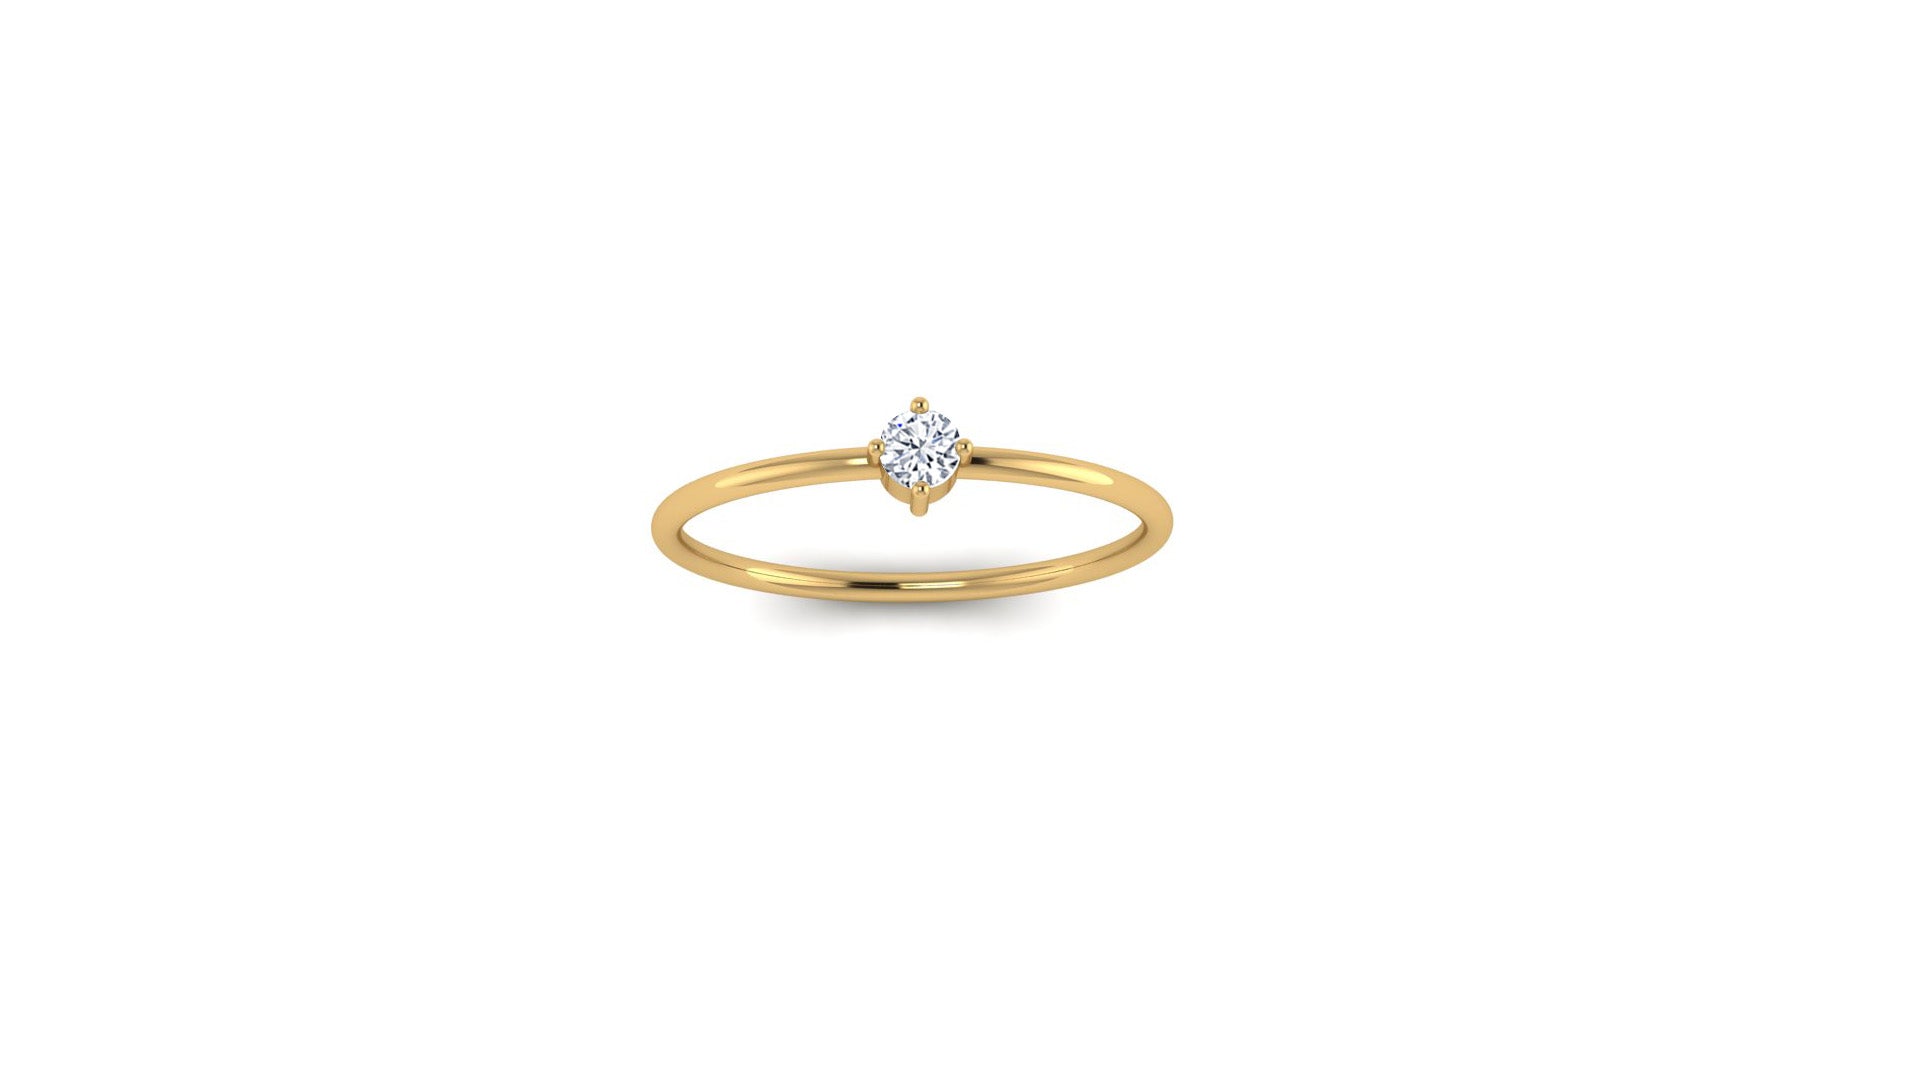 Solo Diamond Ring in 14kt Yellow Gold